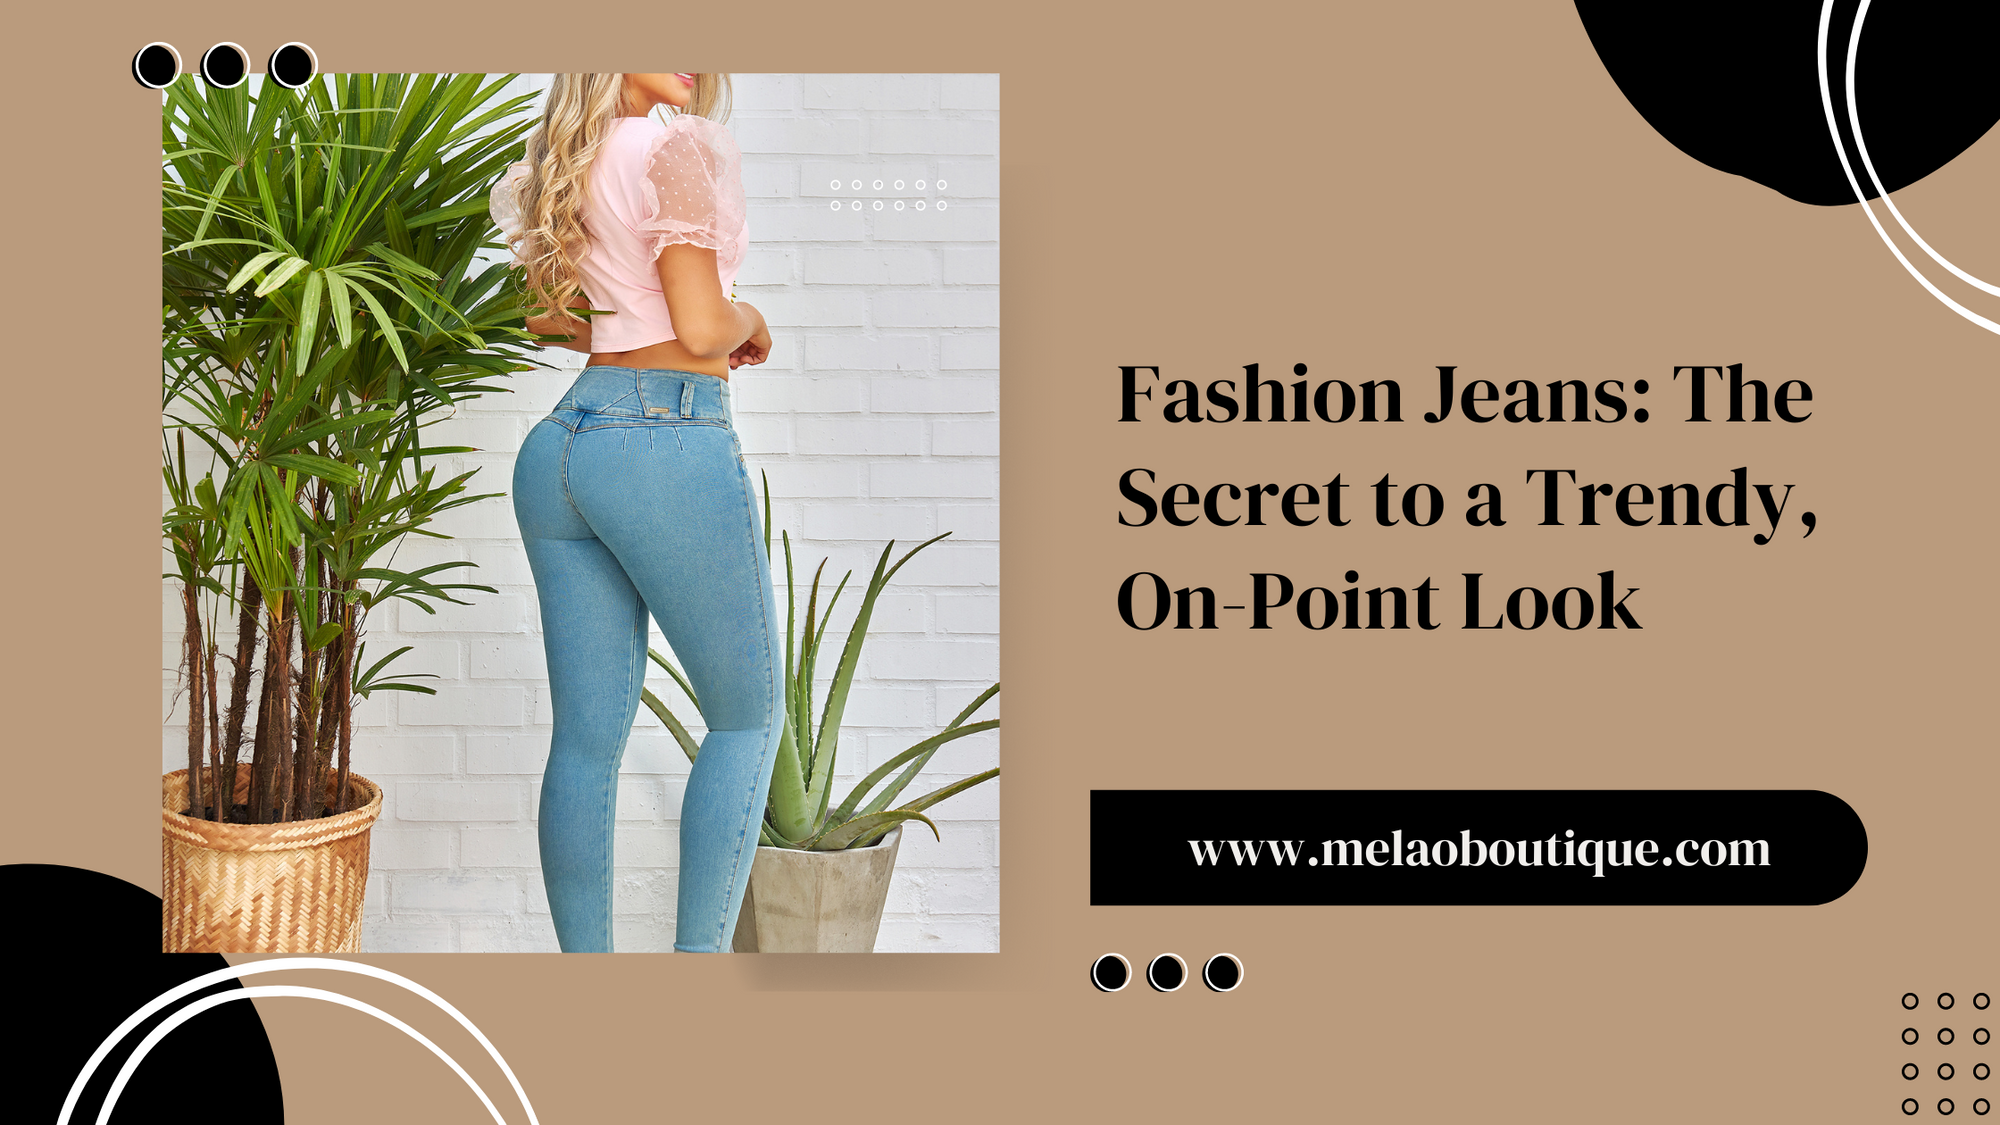 Fashion Jeans The Secret to a Trendy, On-Point Look